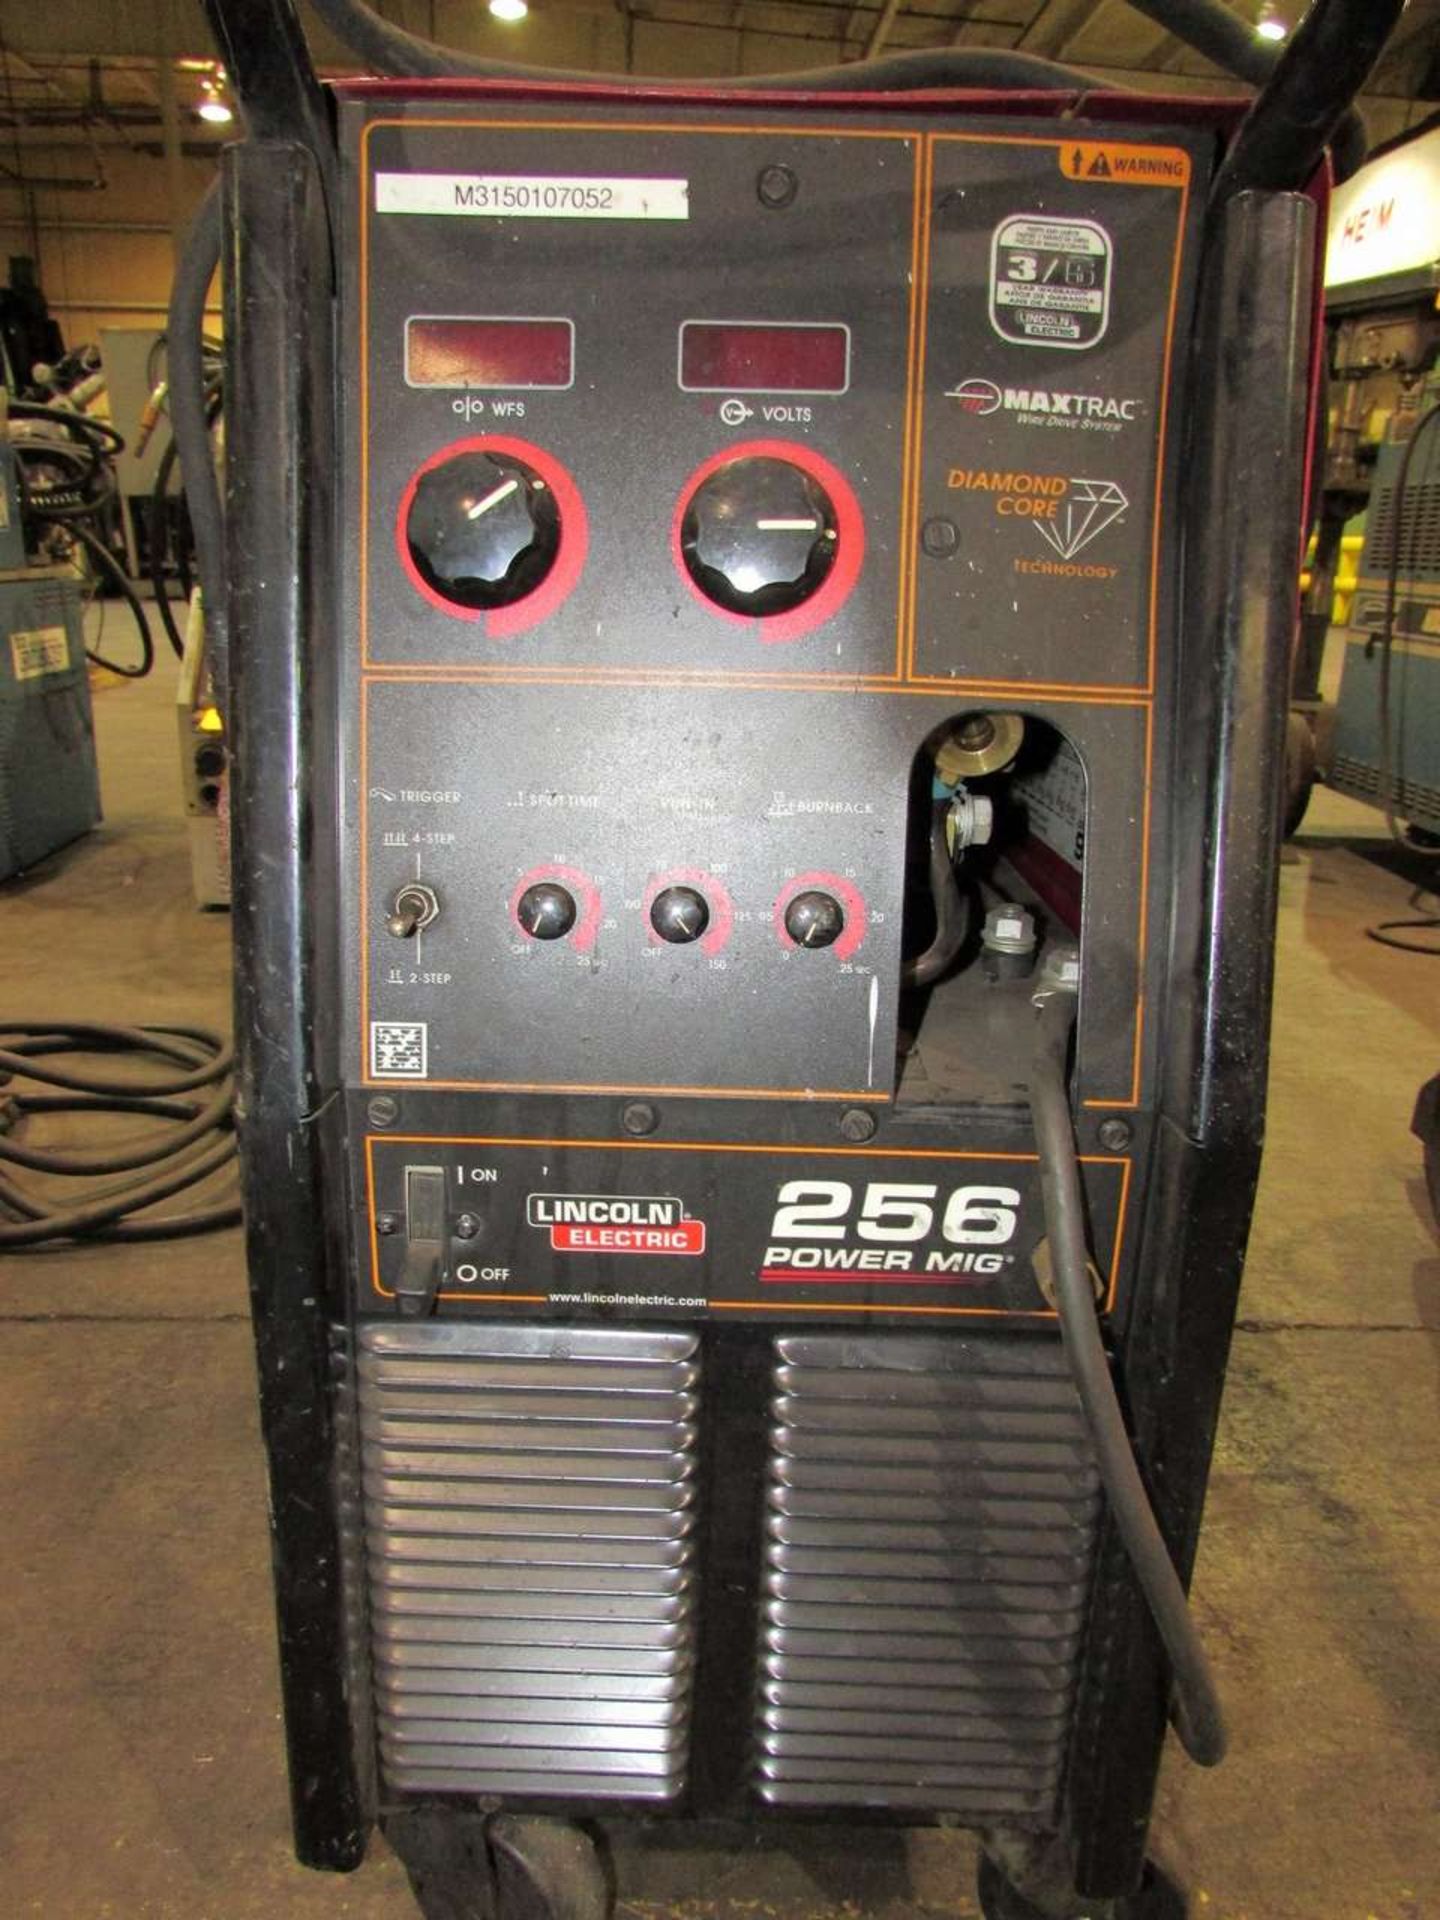 Lincoln Electric Power MIG 256 CV DC Welding Power Source - Image 2 of 5